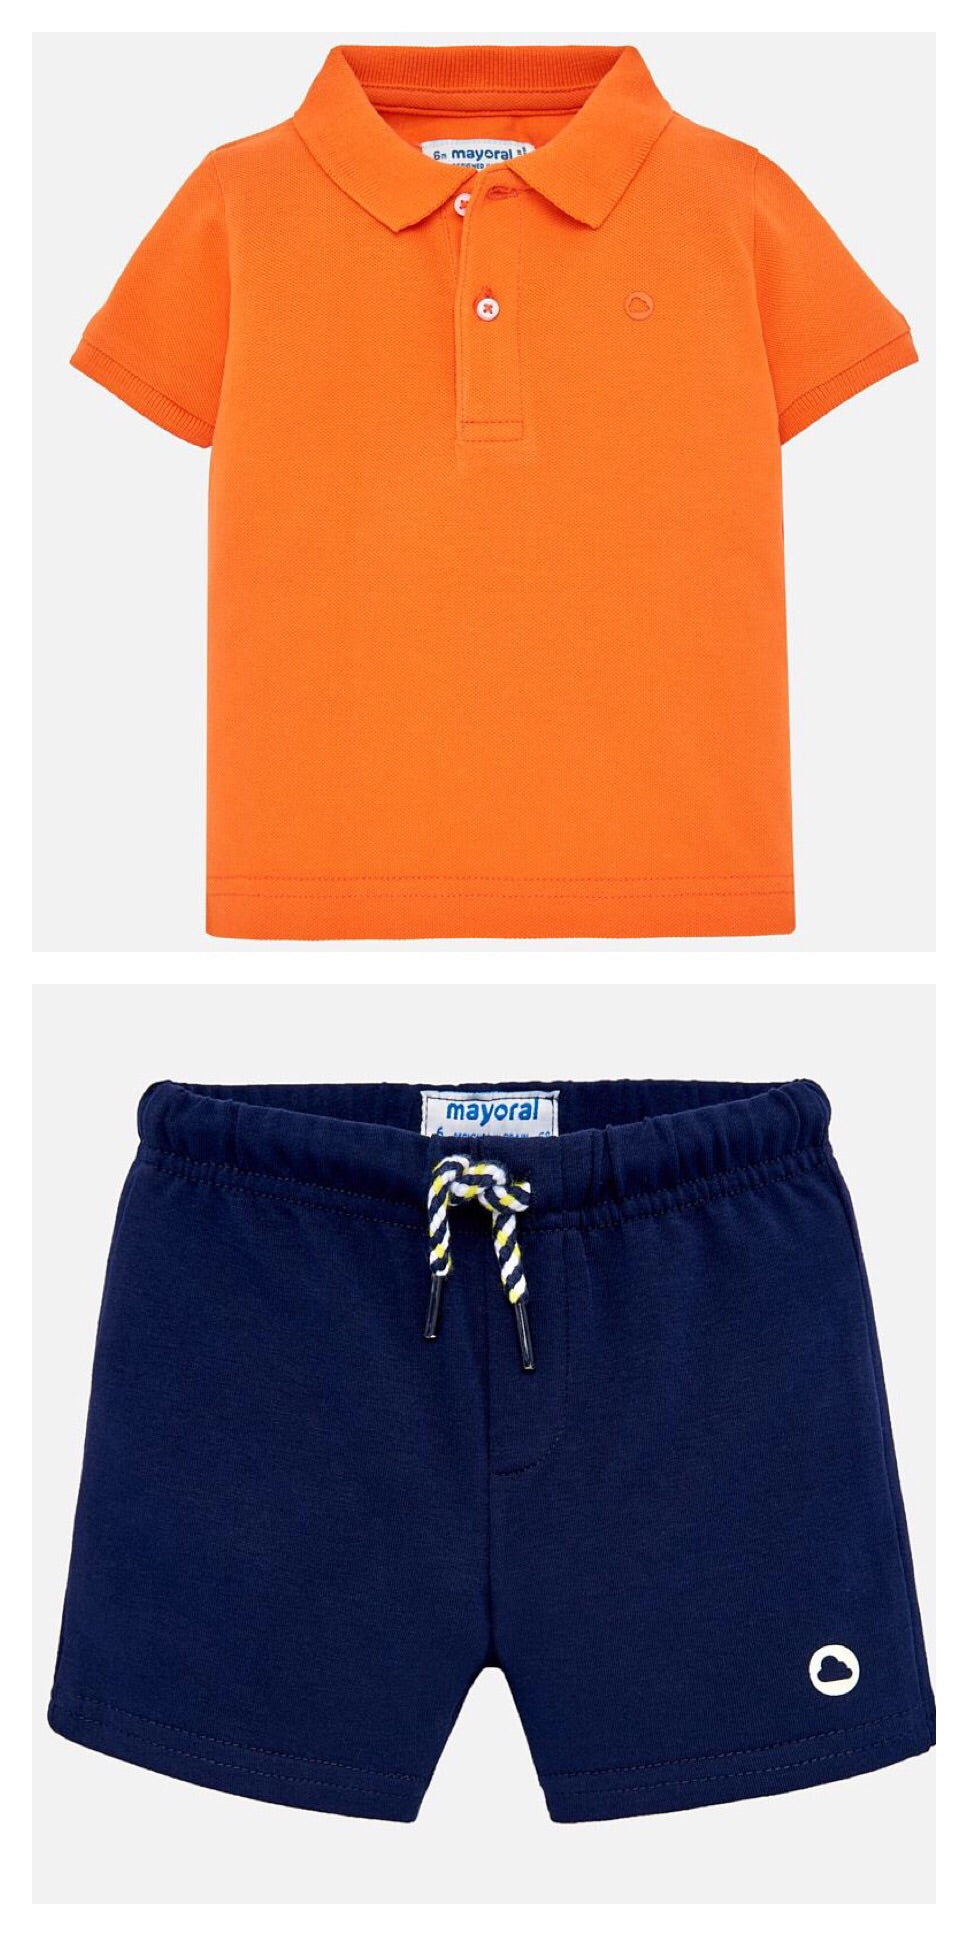 Boys Short Sleeved Polo Shirt and Contrasting Cotton Shorts Set